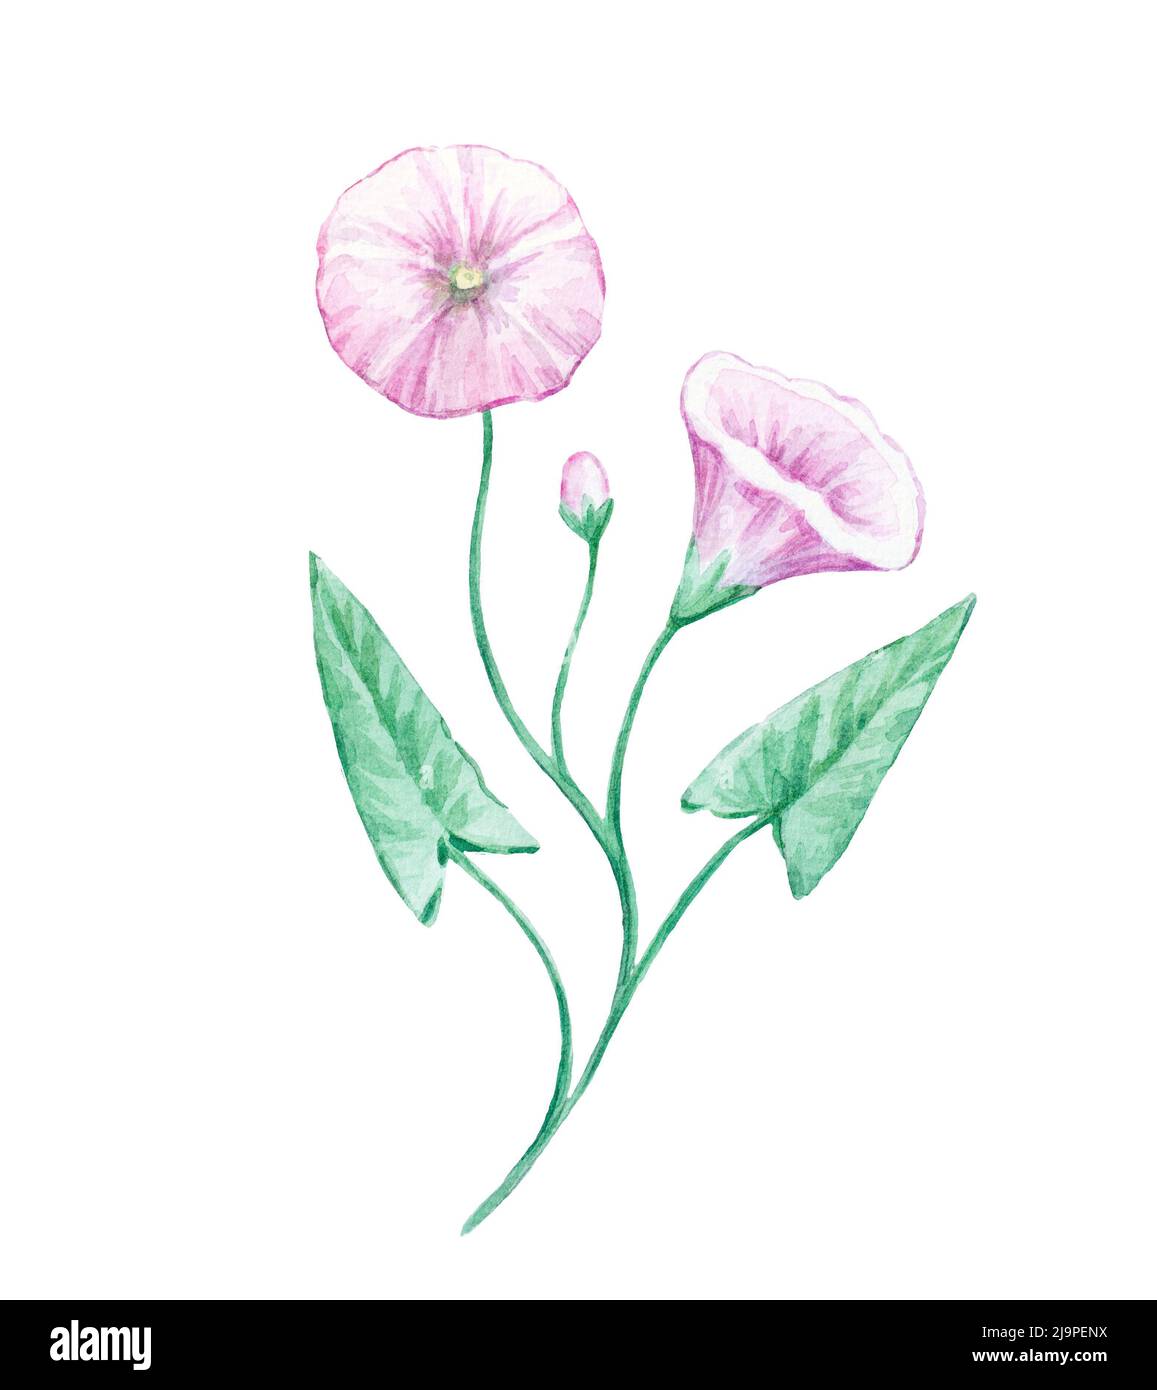 Detailed realistic watercolor botanical illustration. Field bindweed isolated on white background.  Stock Photo